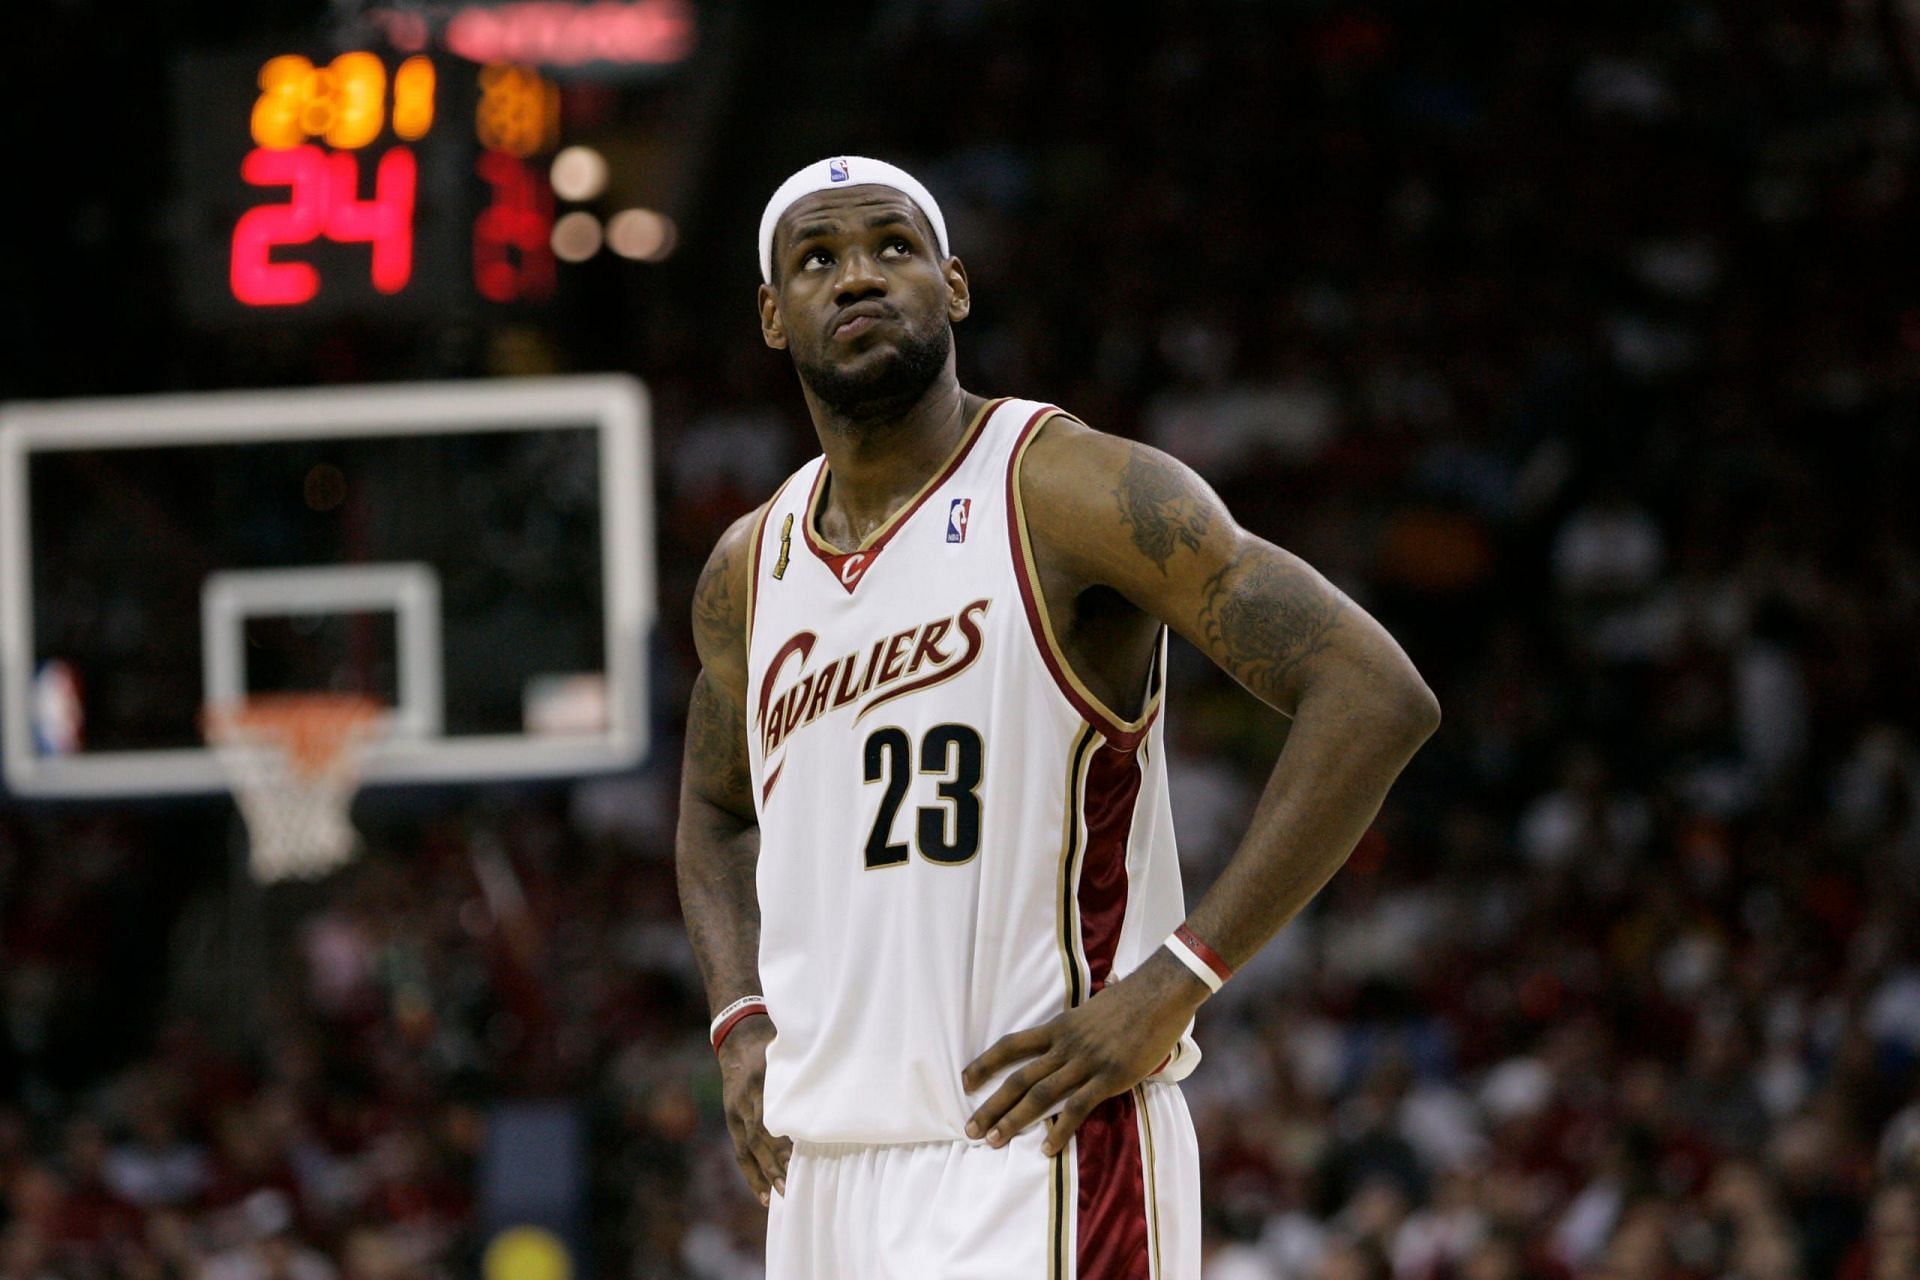 The 06-07 season would be the first time LeBron went on to make an NBA Finals.